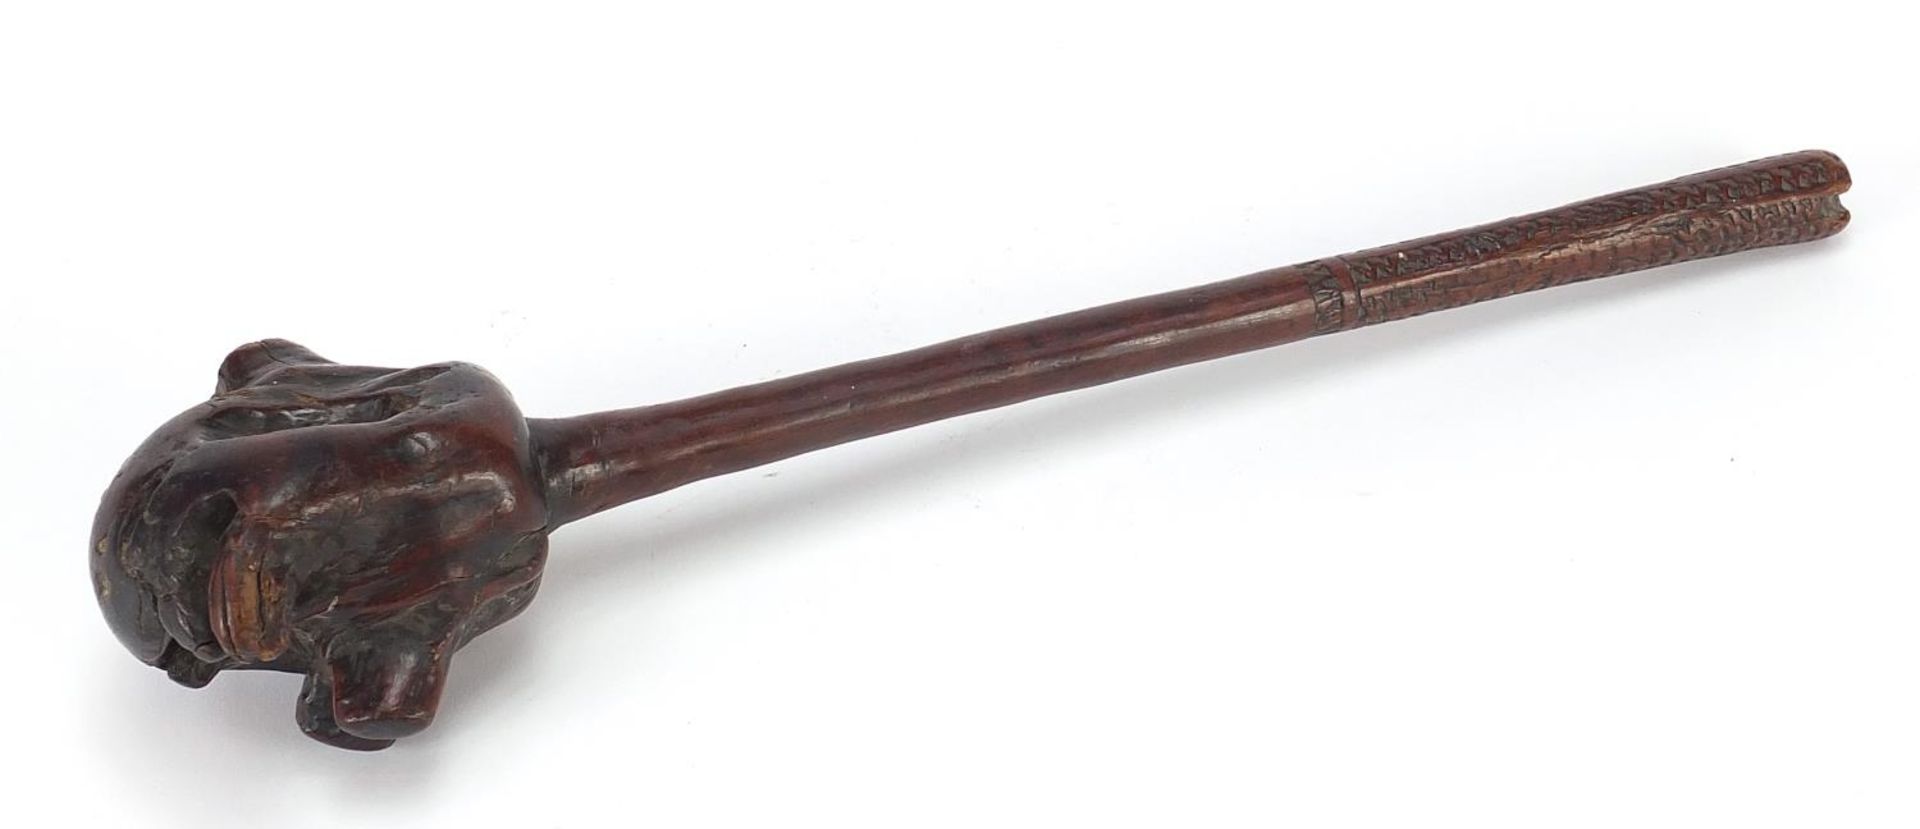 Tribal interest Fijian Iula Tavatava throwing club with carved grip, 38.5cm in length - Image 3 of 4